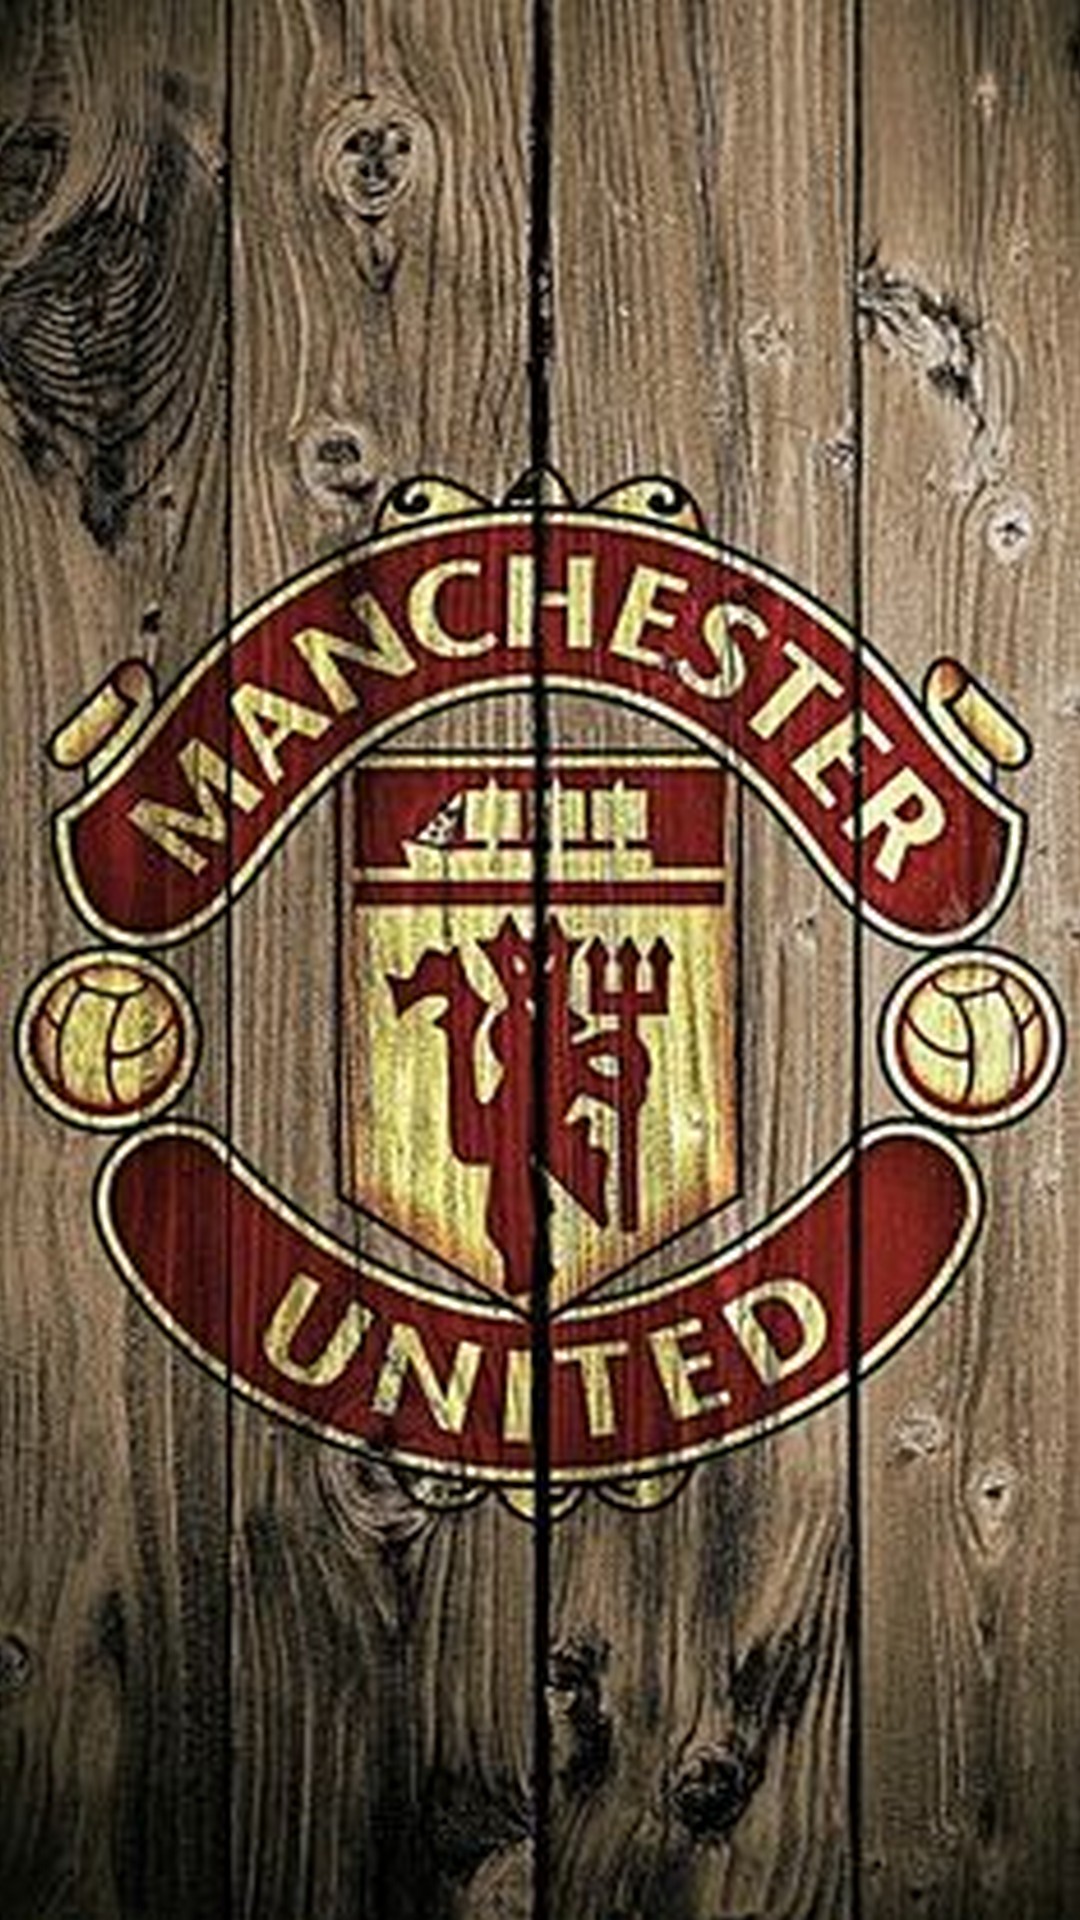 Mobile Wallpaper HD Manchester United with high-resolution 1080x1920 pixel. You can use this wallpaper for your Desktop Computers, Mac Screensavers, Windows Backgrounds, iPhone Wallpapers, Tablet or Android Lock screen and another Mobile device